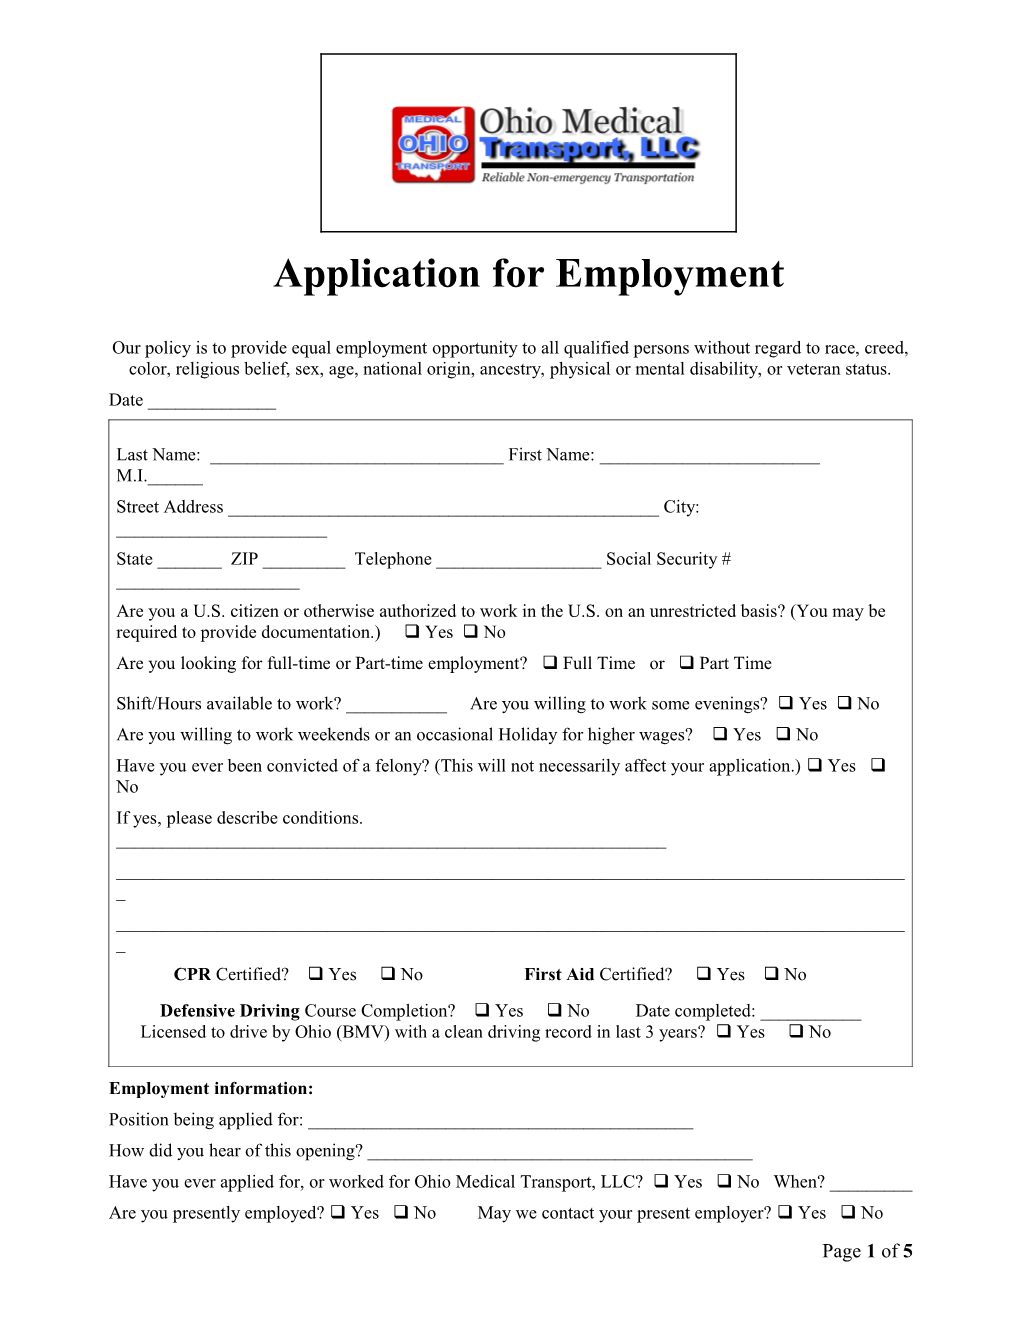 Application for Employment s173